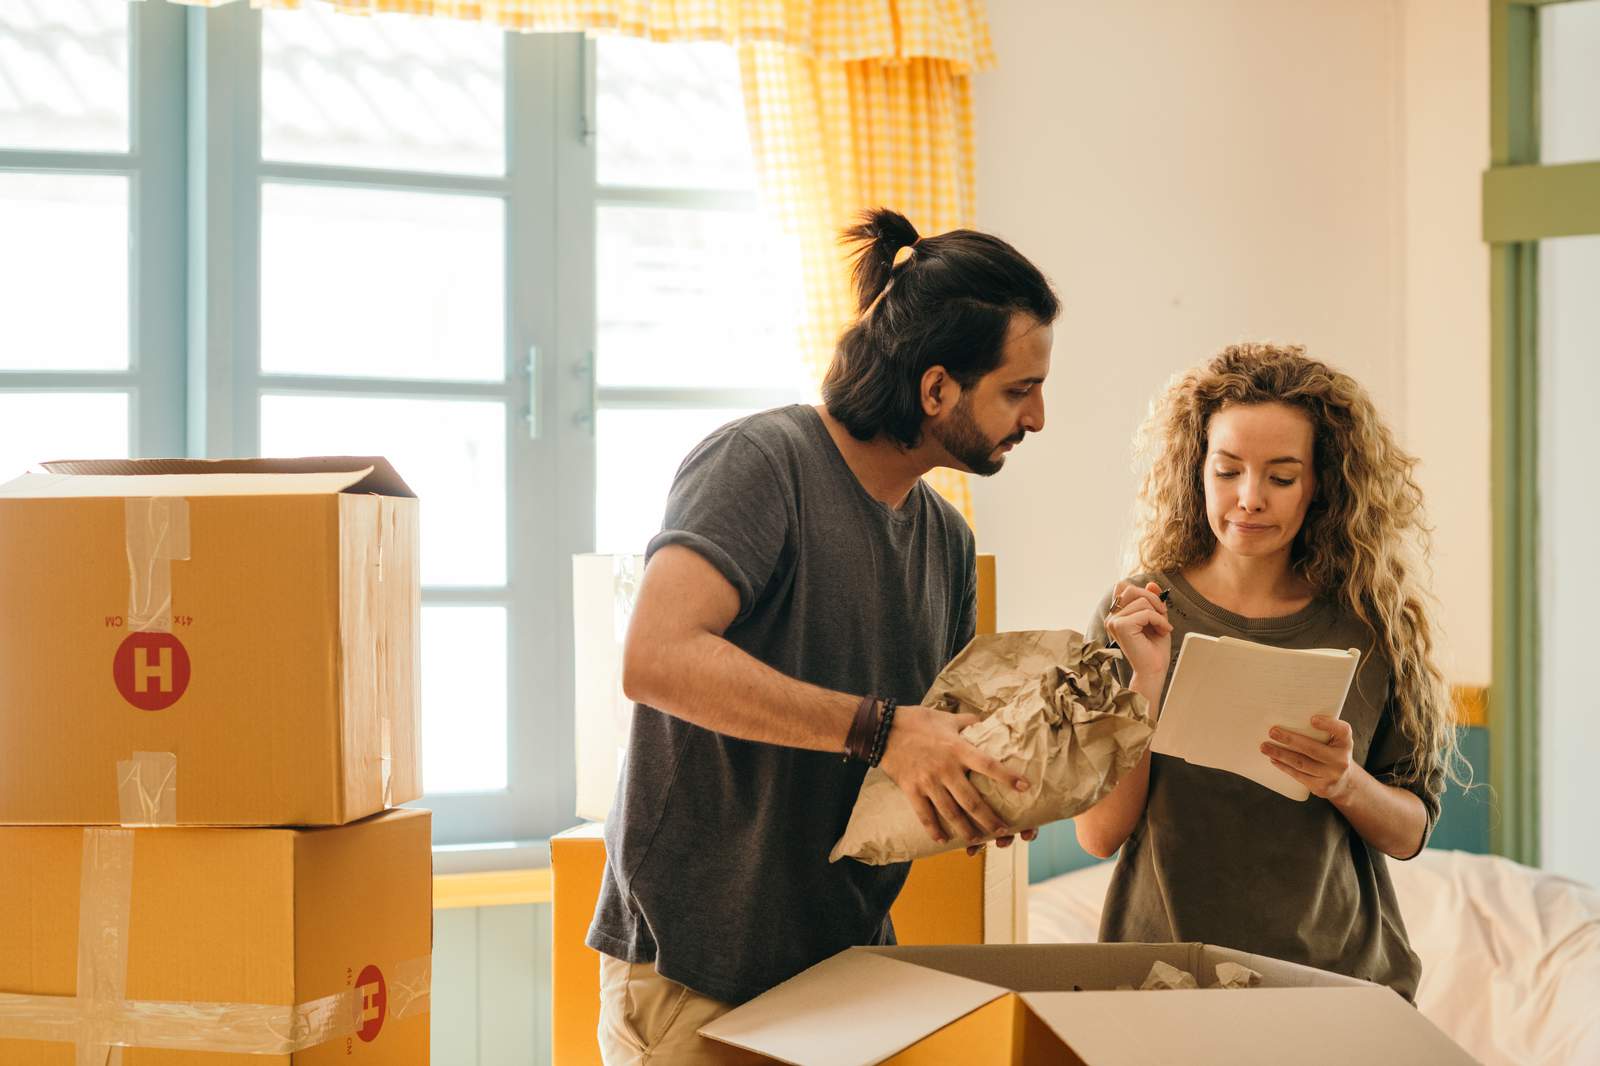 Struggling with rent? Facing eviction? How to navigate a tricky situation